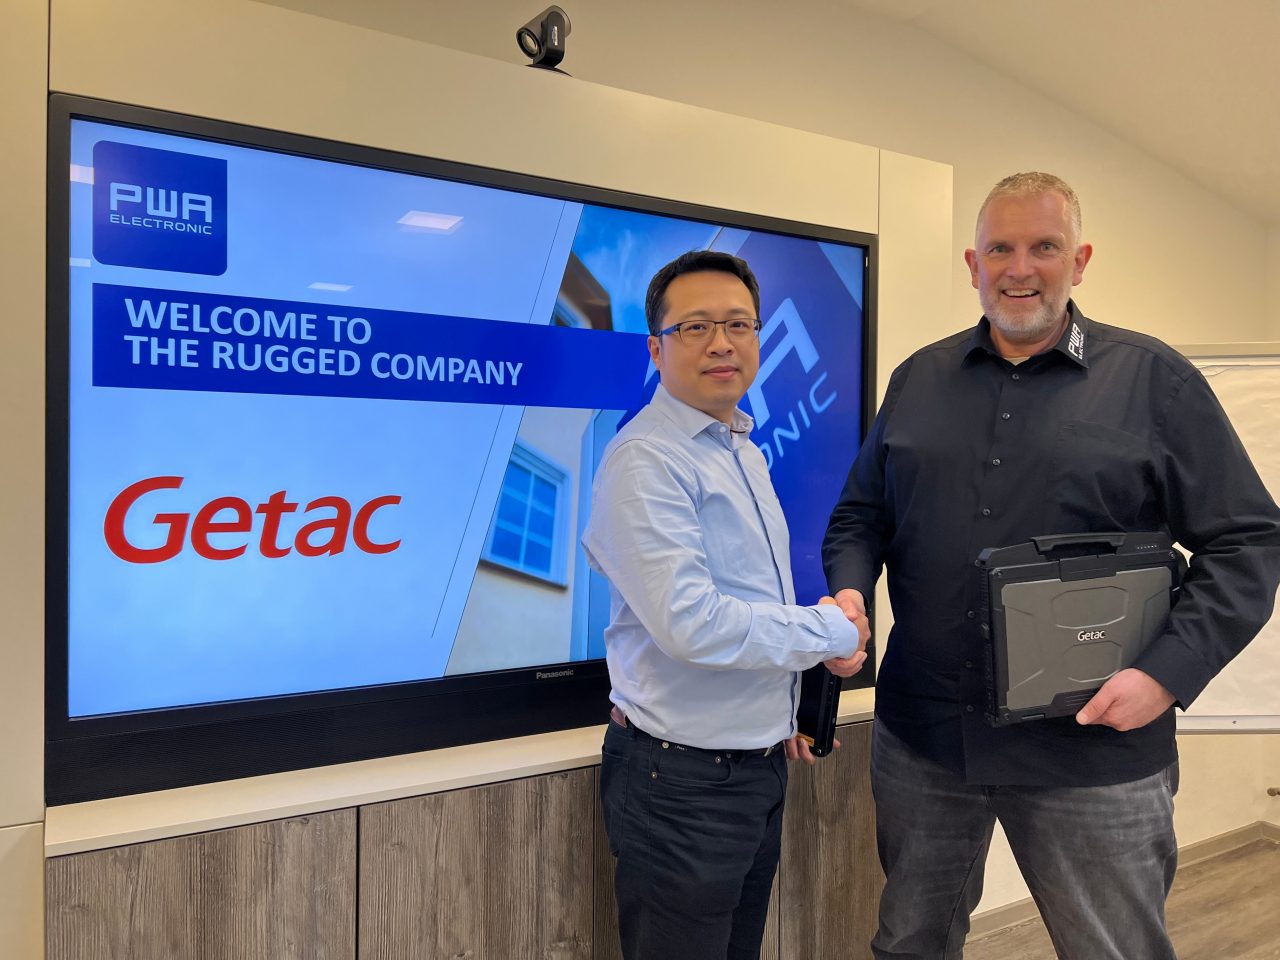 Getac enhances its range of versatile Android devices with launch of AI-ready fully rugged tablet